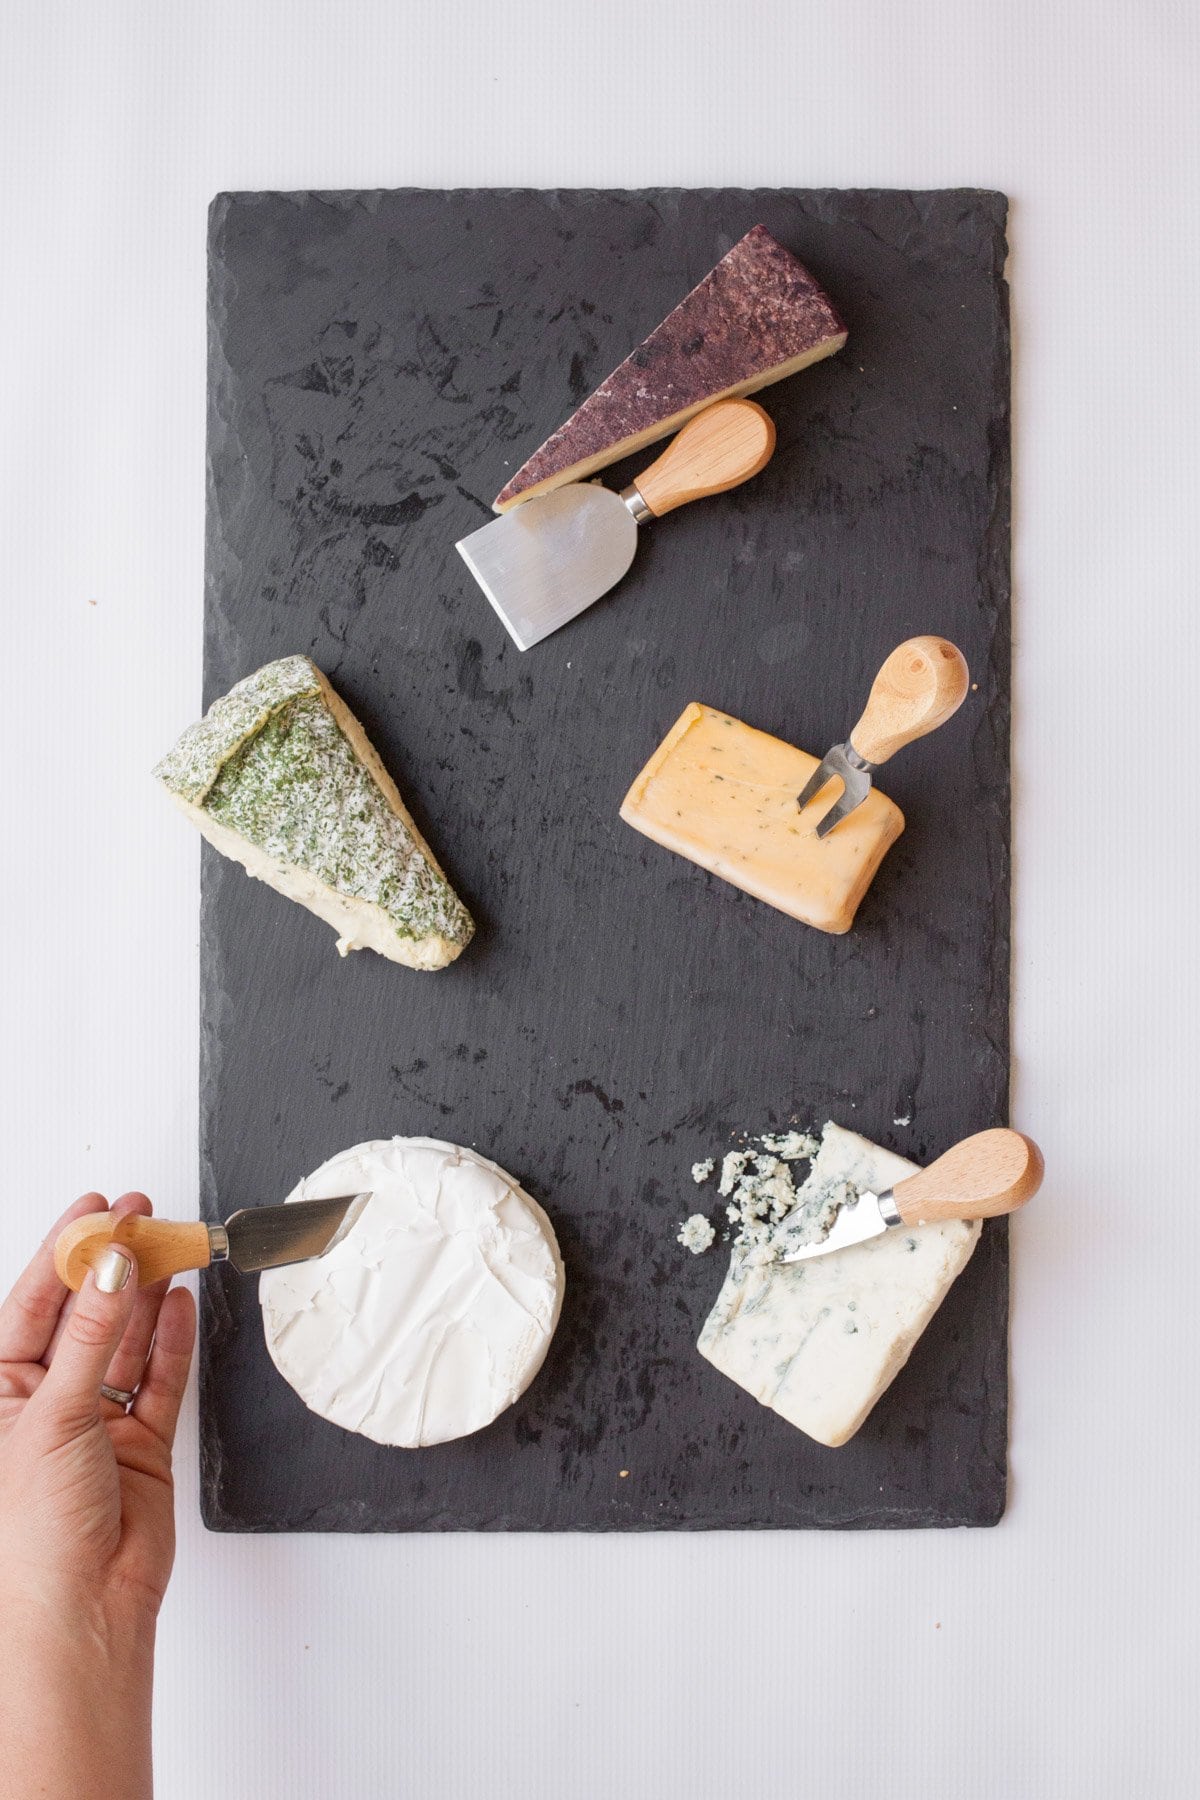 Slate platter with 5 wedges of cheese, each with a knife.